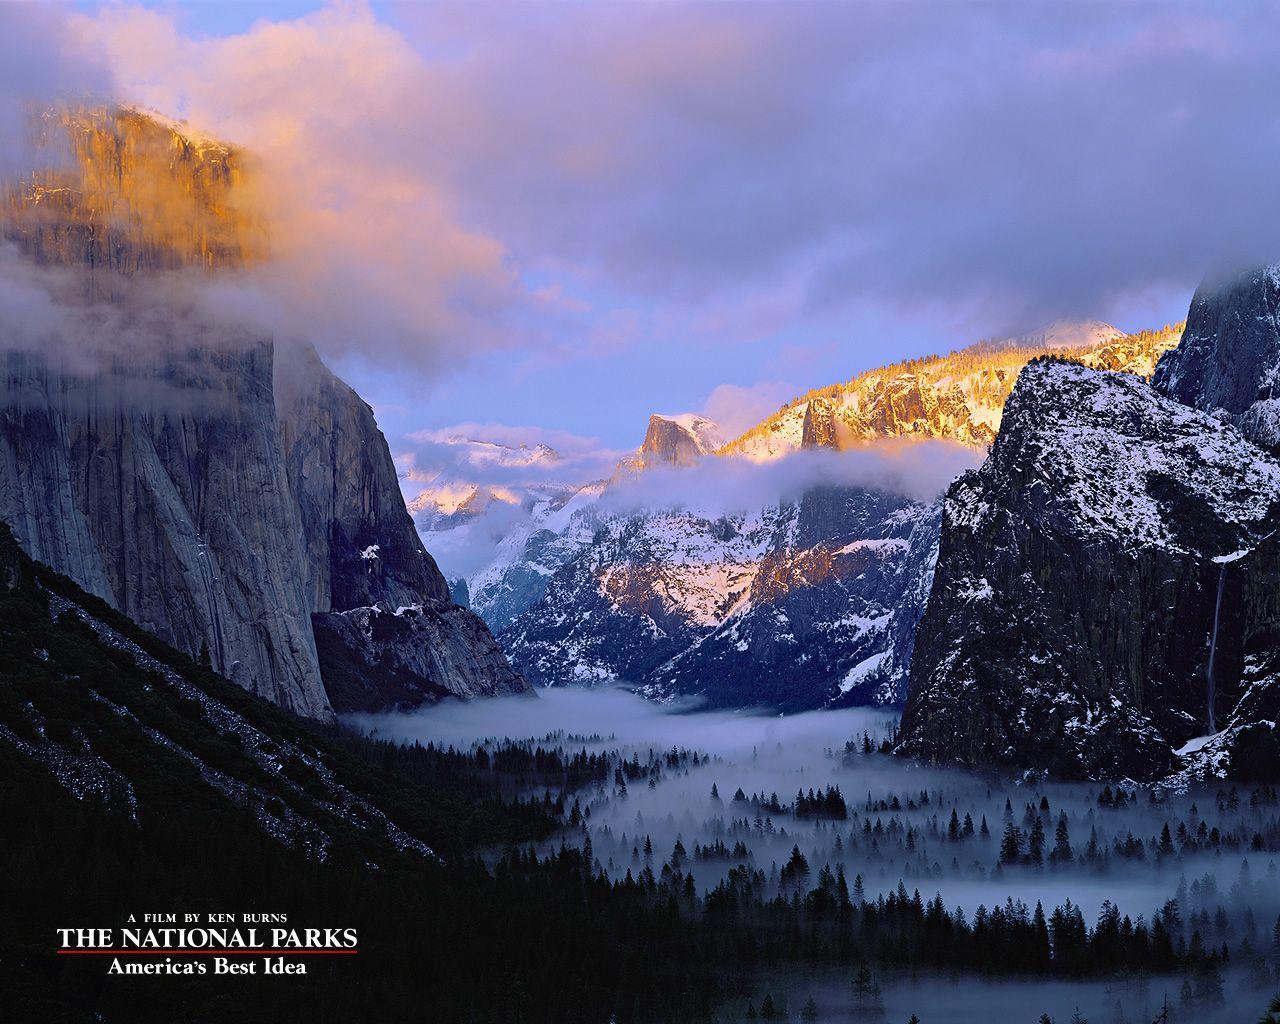 The National Parks: America's Best Idea: Download Wallpaper